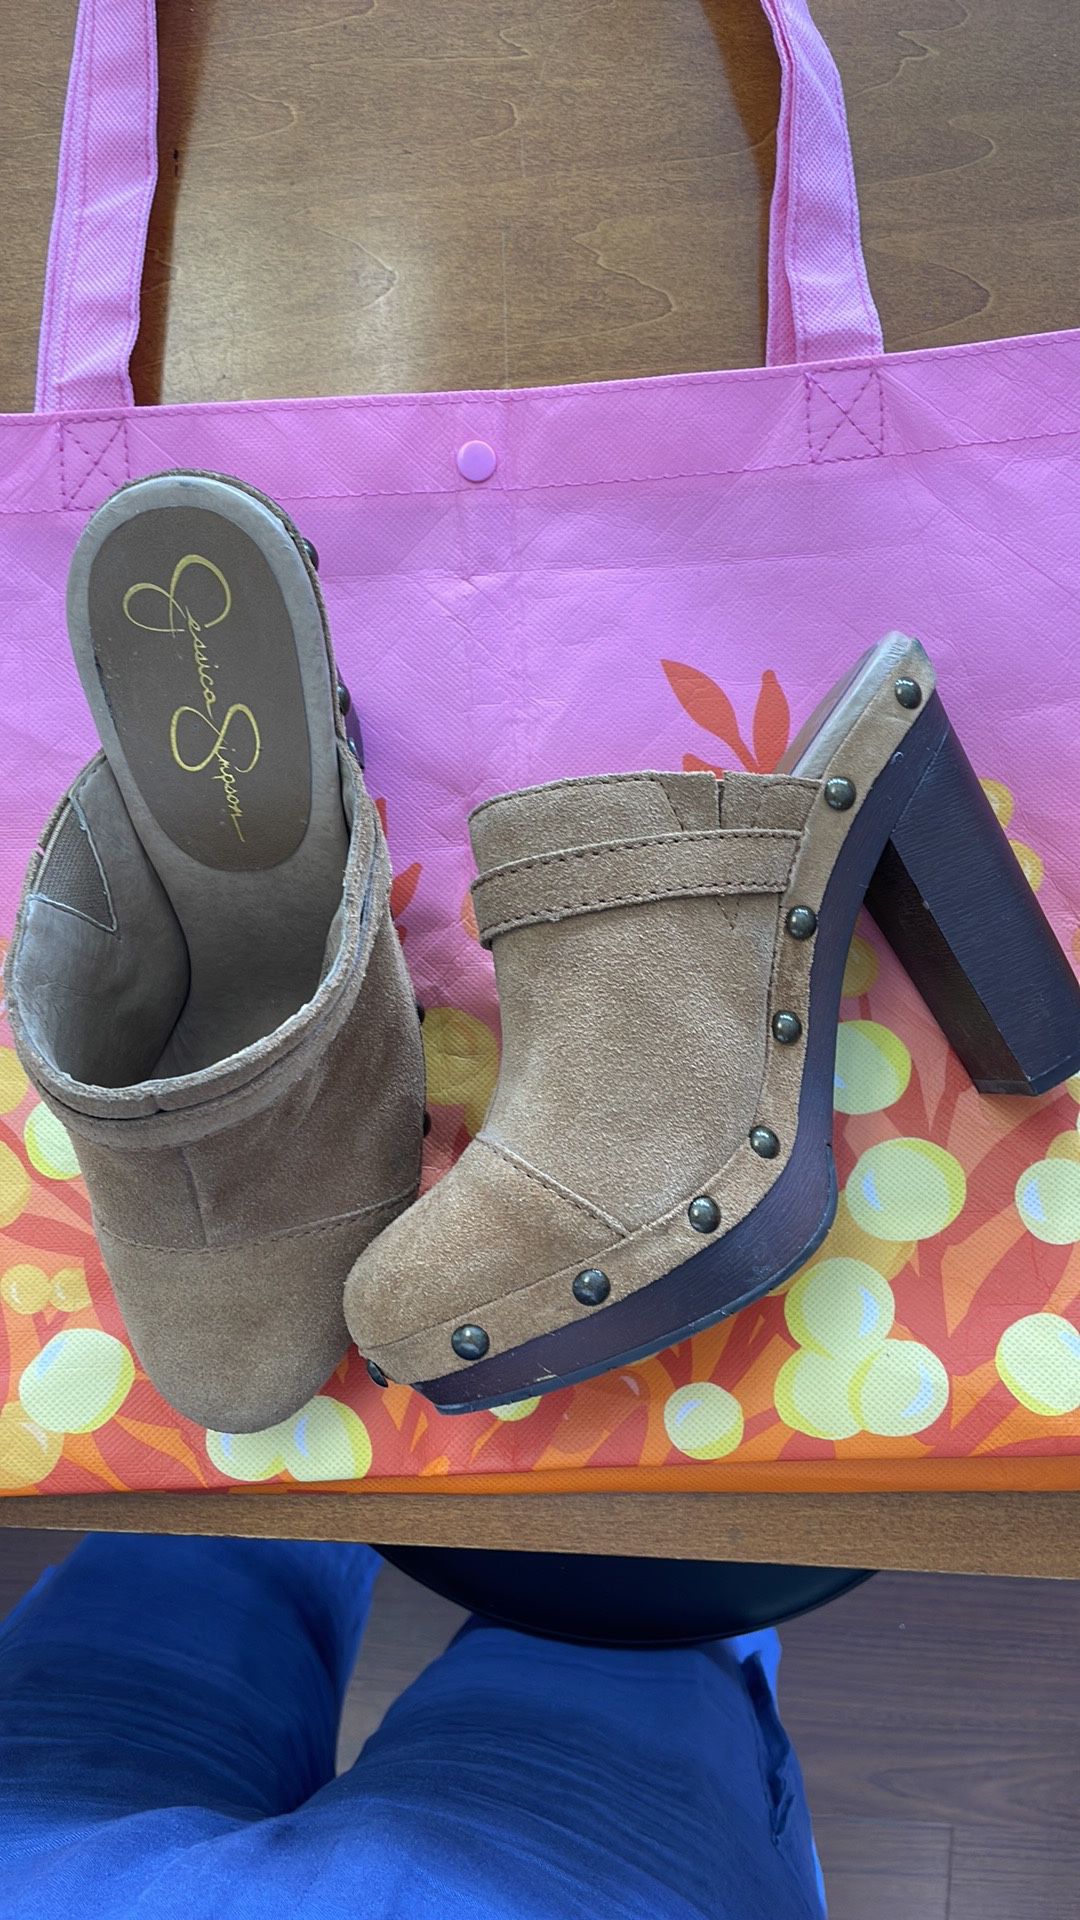 Jessica Simpson Caral Tan Suede Platform Shoes. Mule style